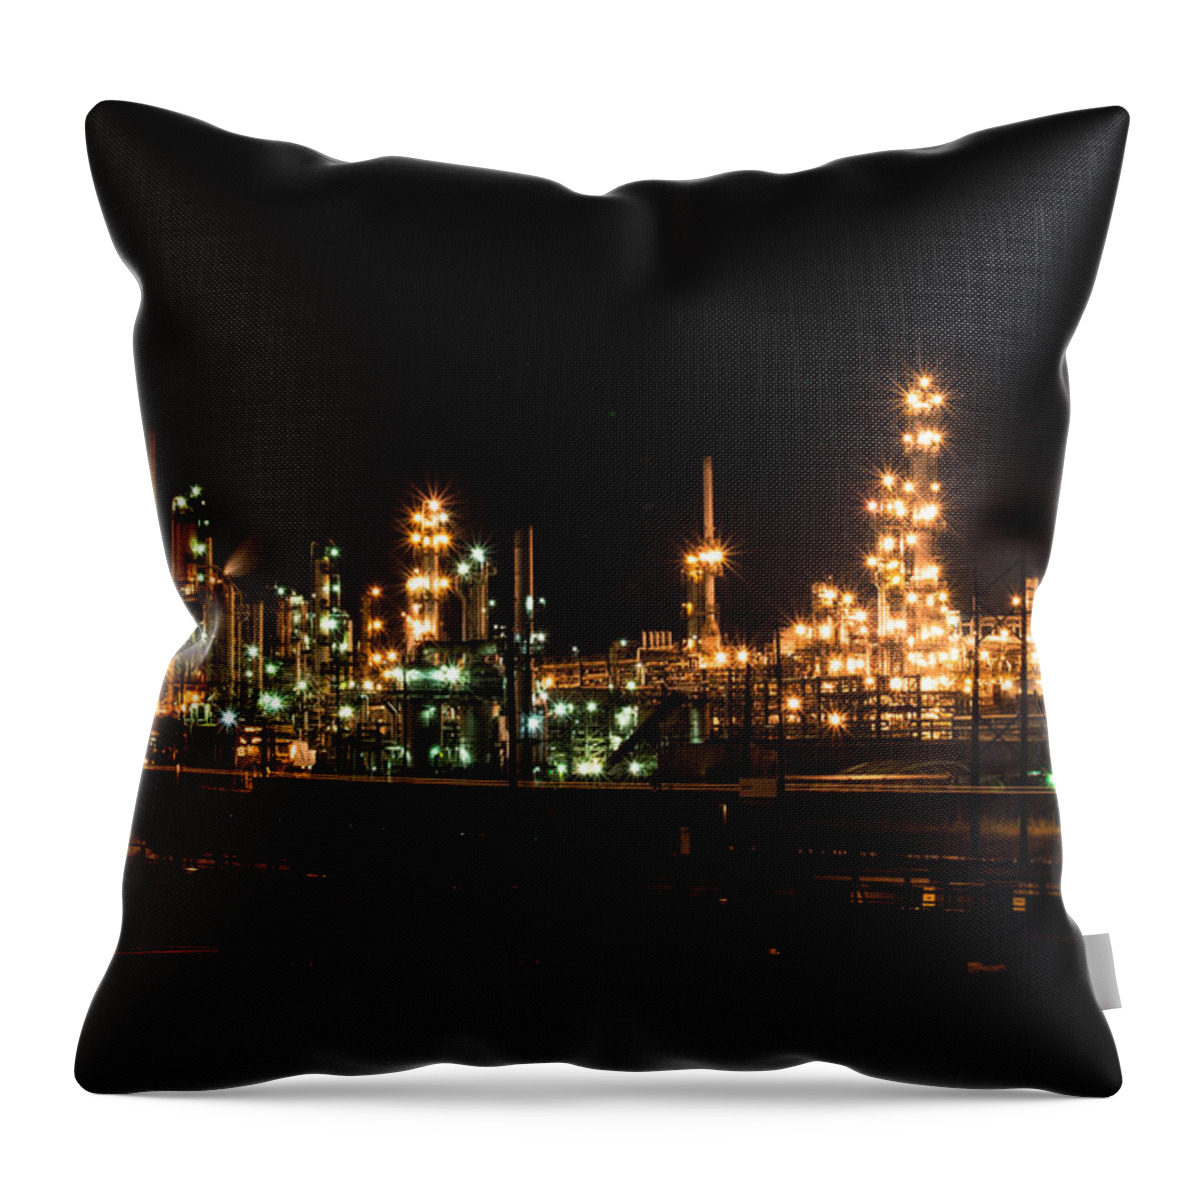 Refinery Throw Pillow featuring the photograph Refinery At Night 3 by Stephen Holst